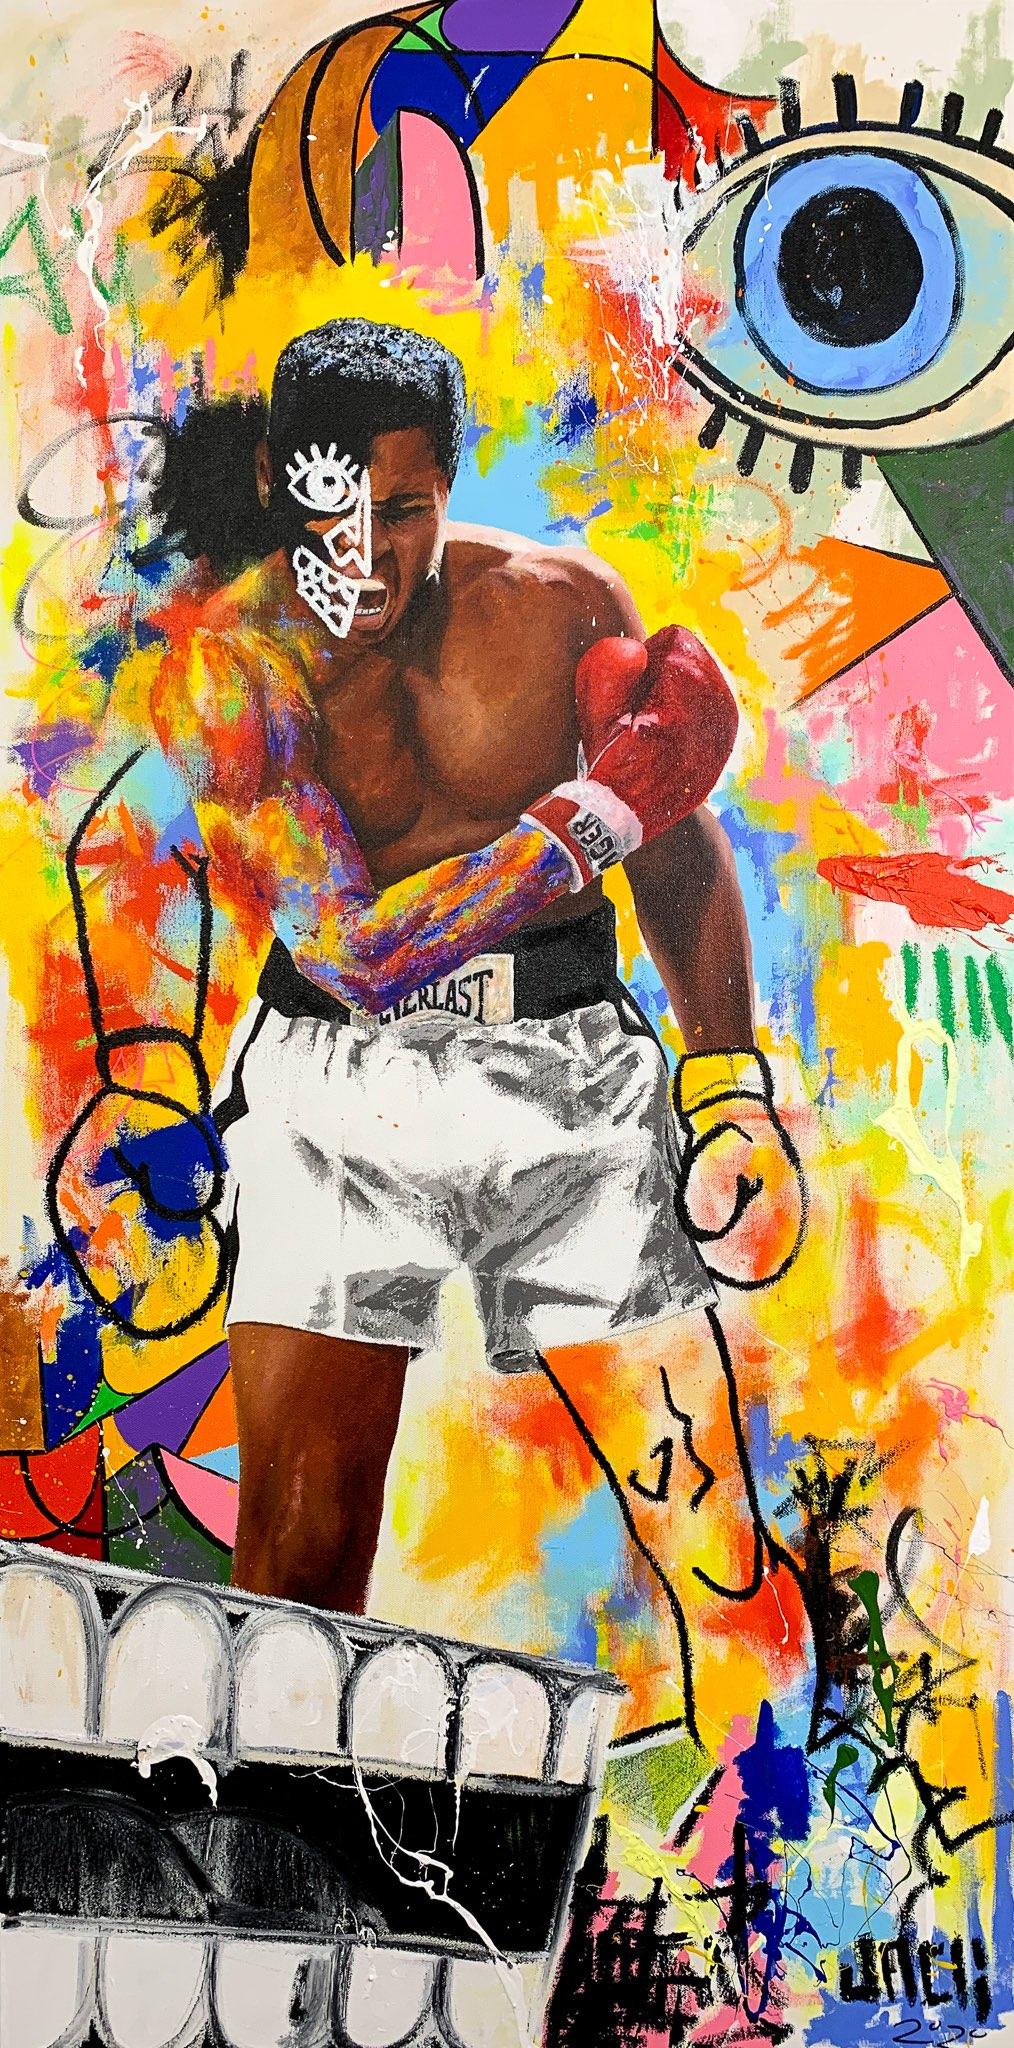 Jack Florczyk Portrait Painting - Muhammad Ali - SOLD - Commission Available